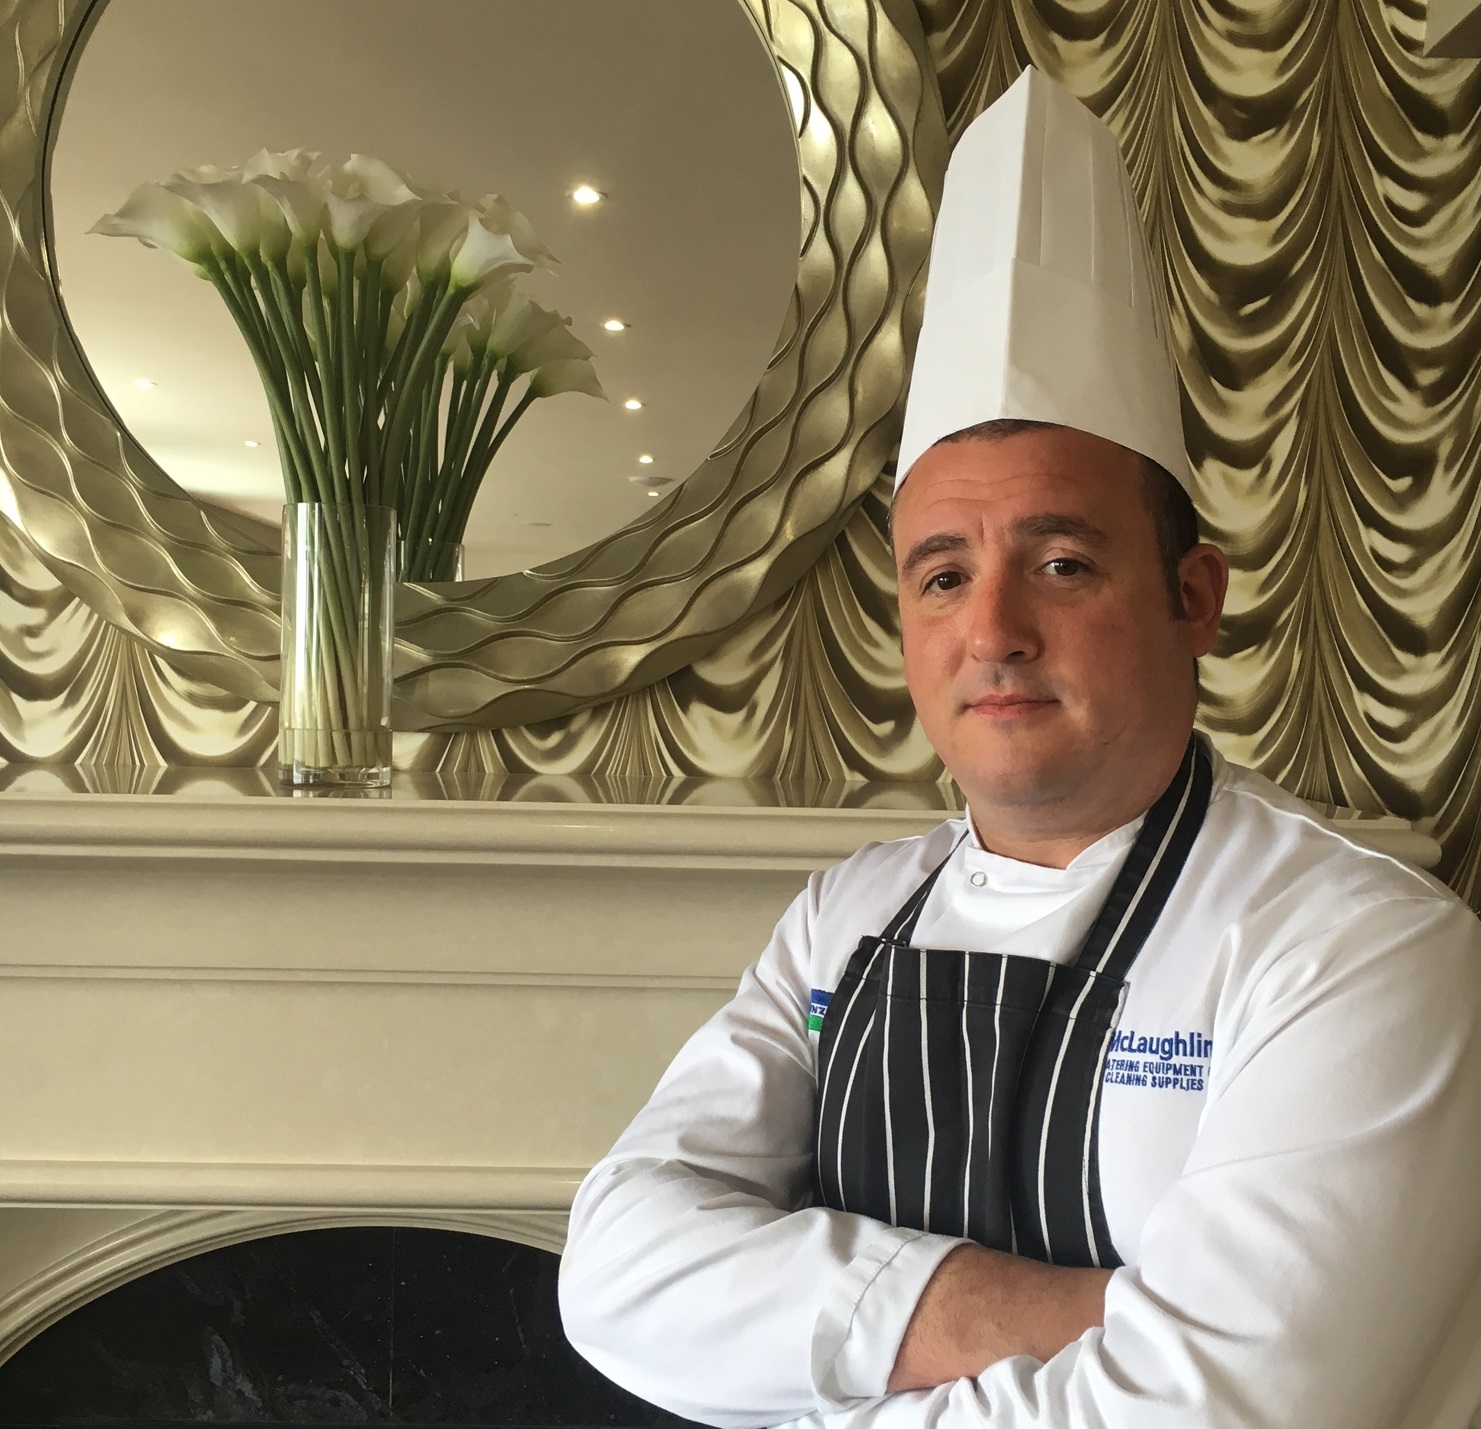 Meet Anthony – Our Executive Head Chef